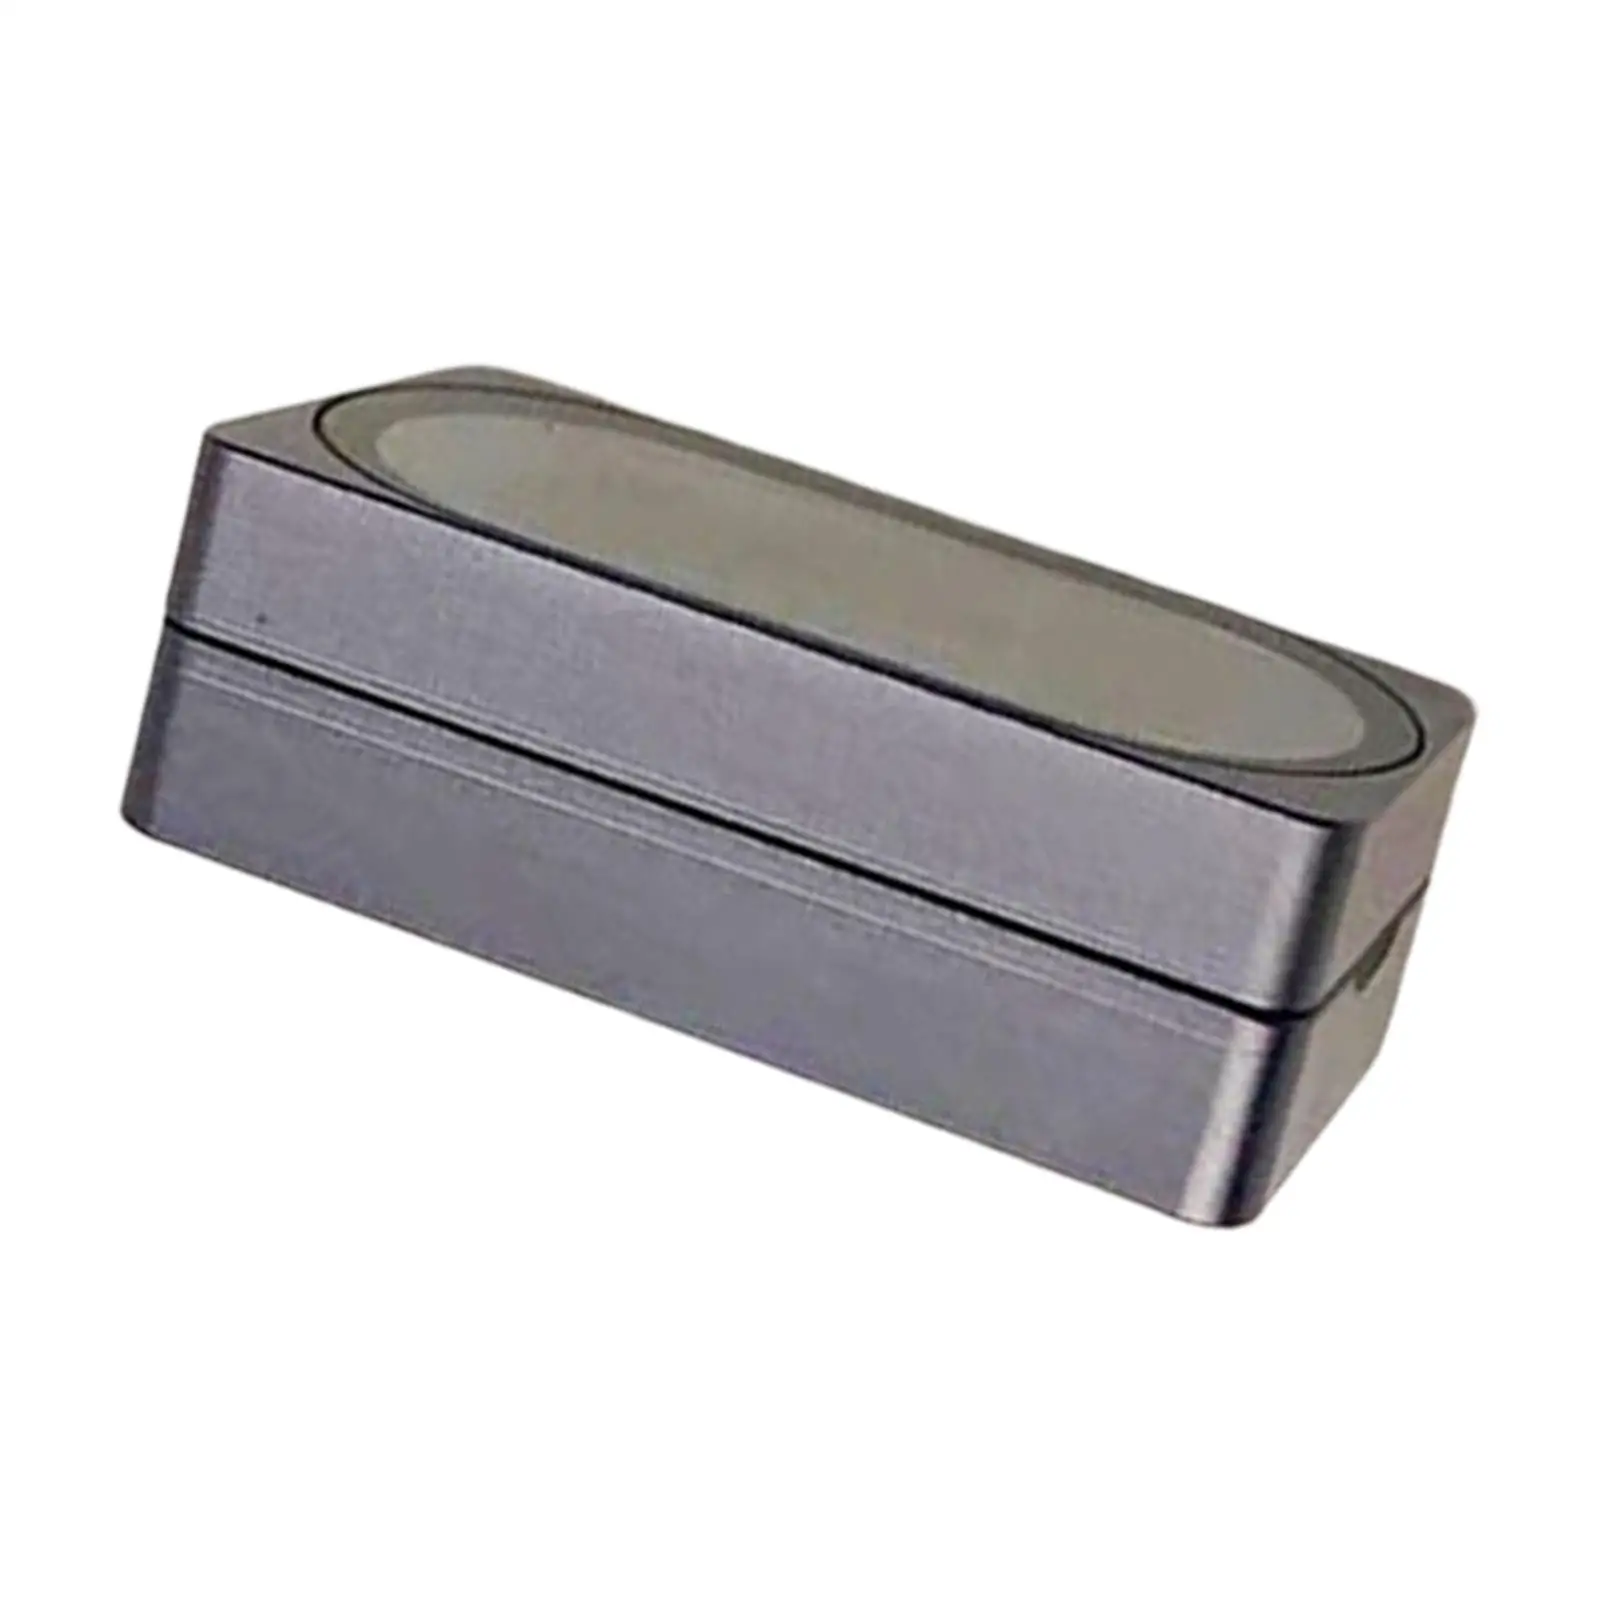 Portable Pool  Chalk Holder Carrier Case Box for Billiard Snooker Accessory